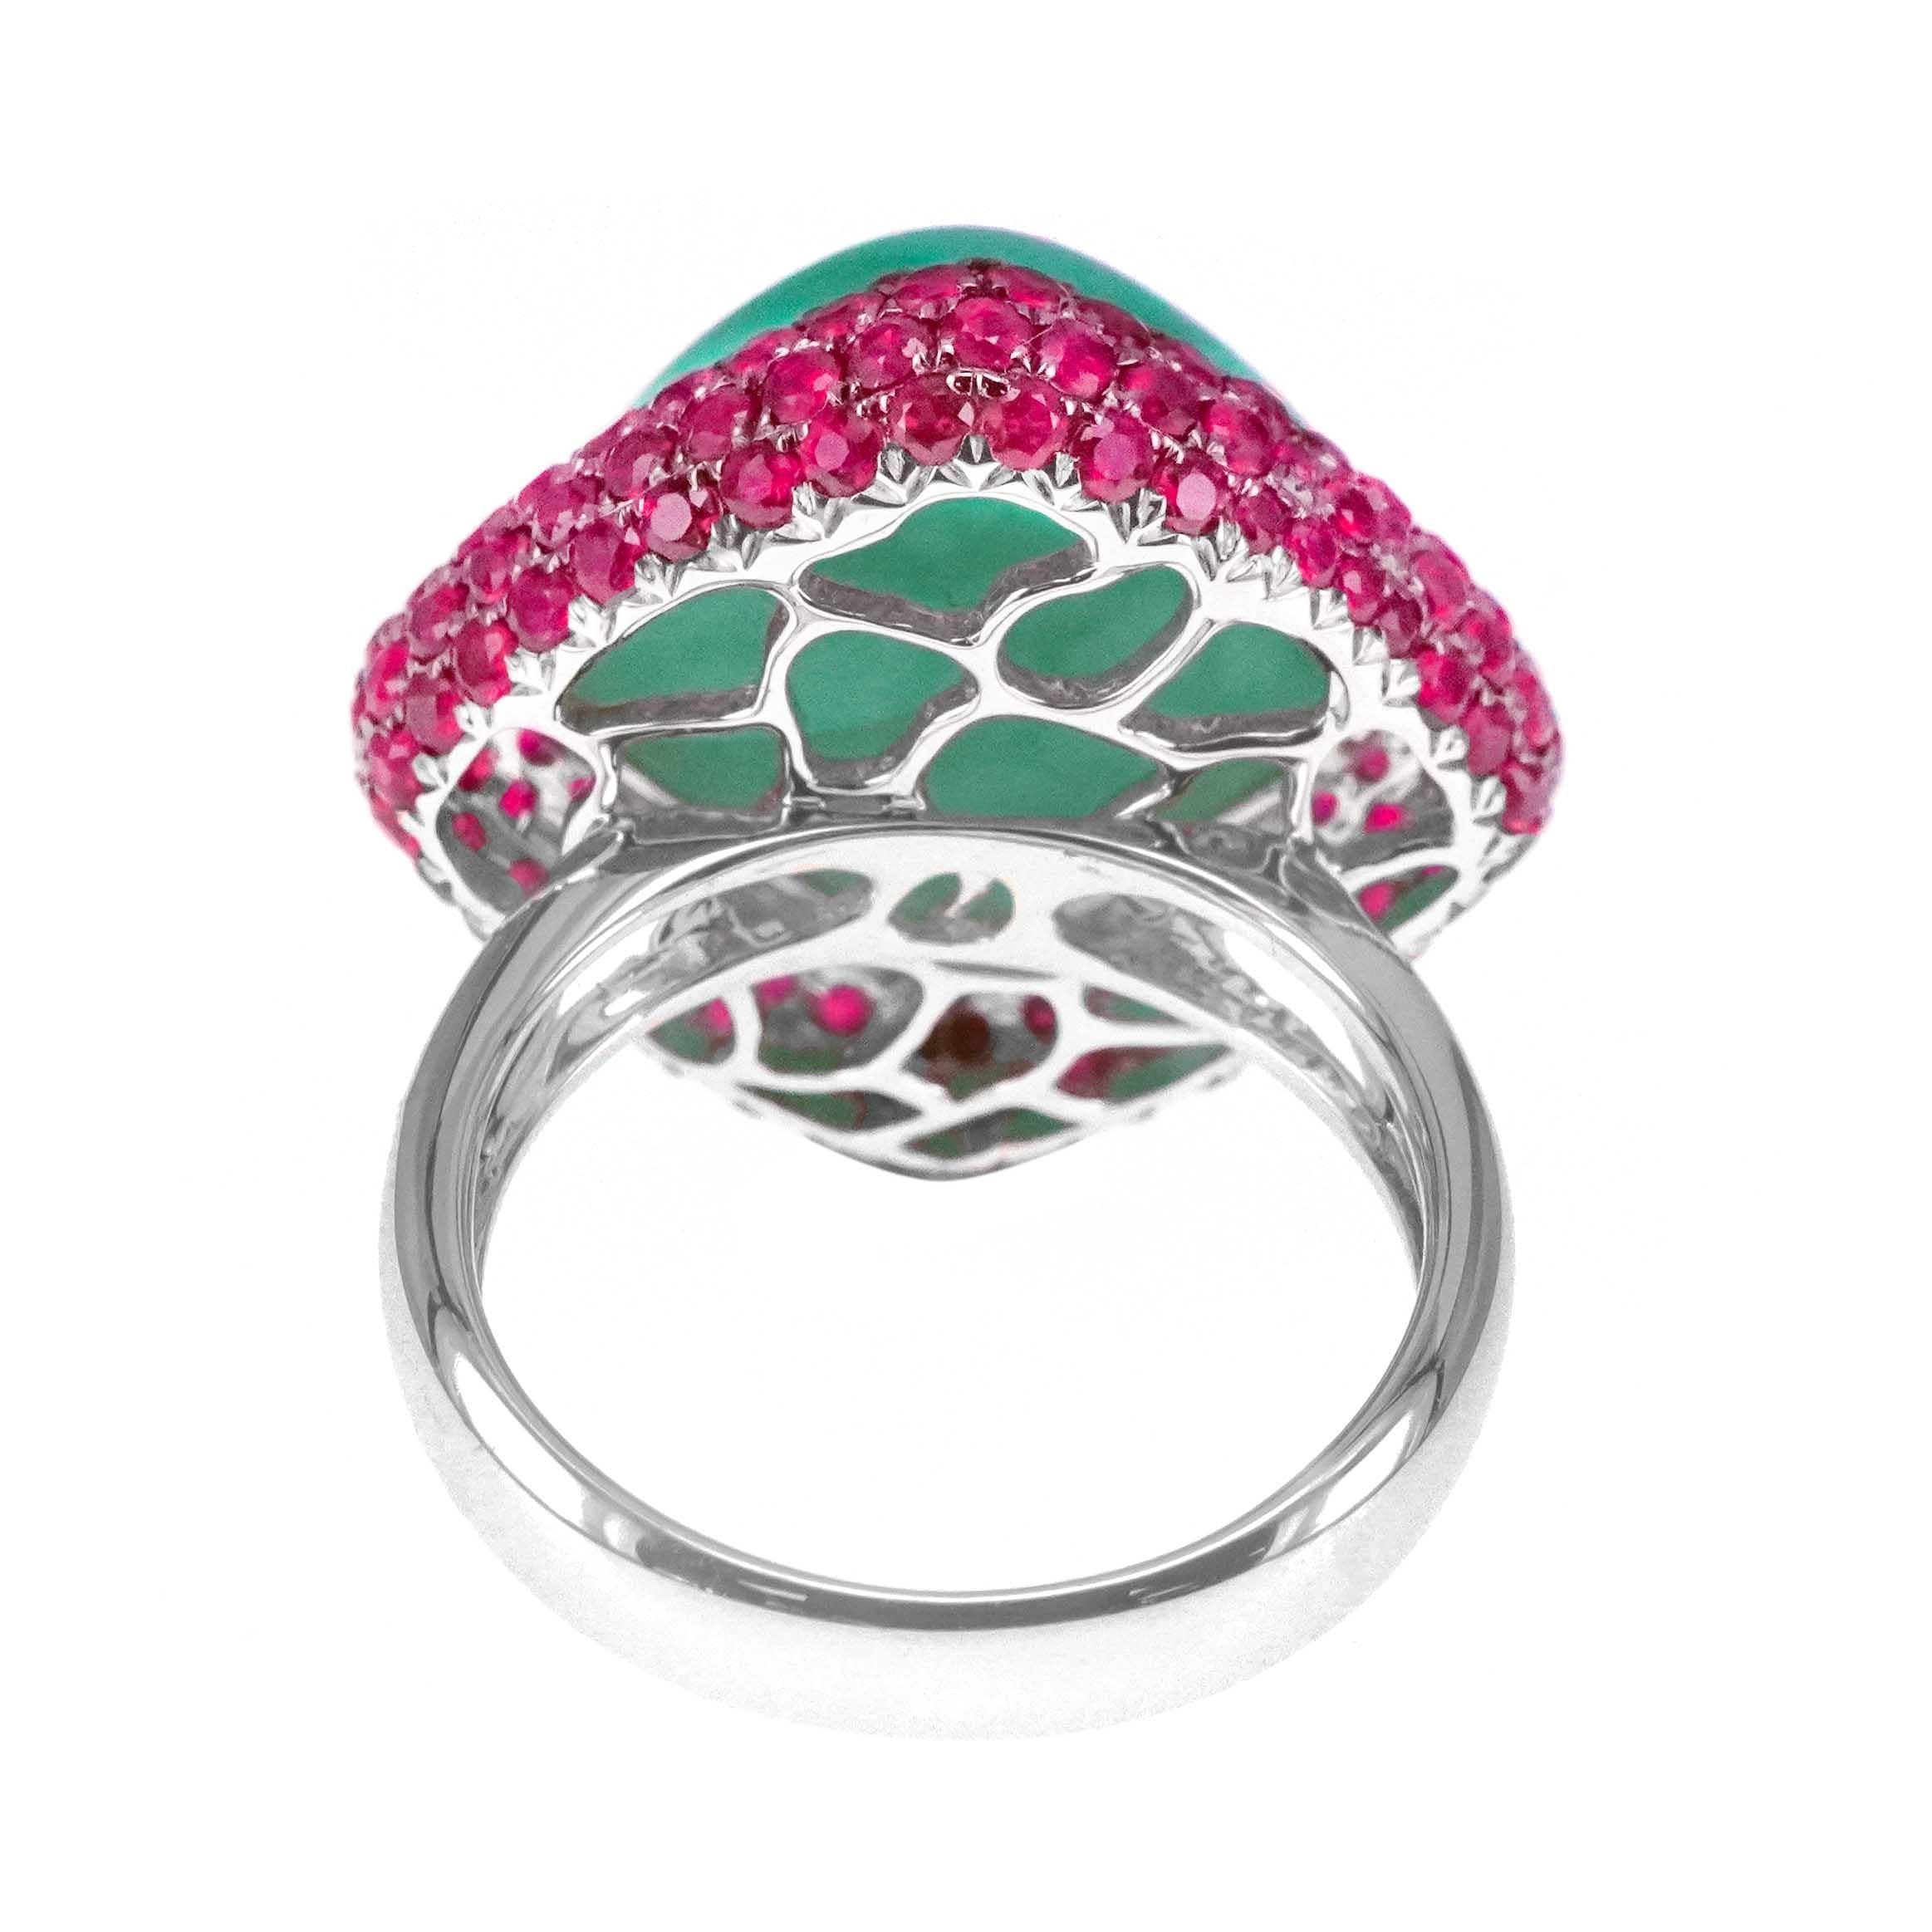 Round Cut 15.35 Carat Chrysoprase & 2.98 Carat Vivid Red Burma Ruby Unique Table Top Ring For Sale